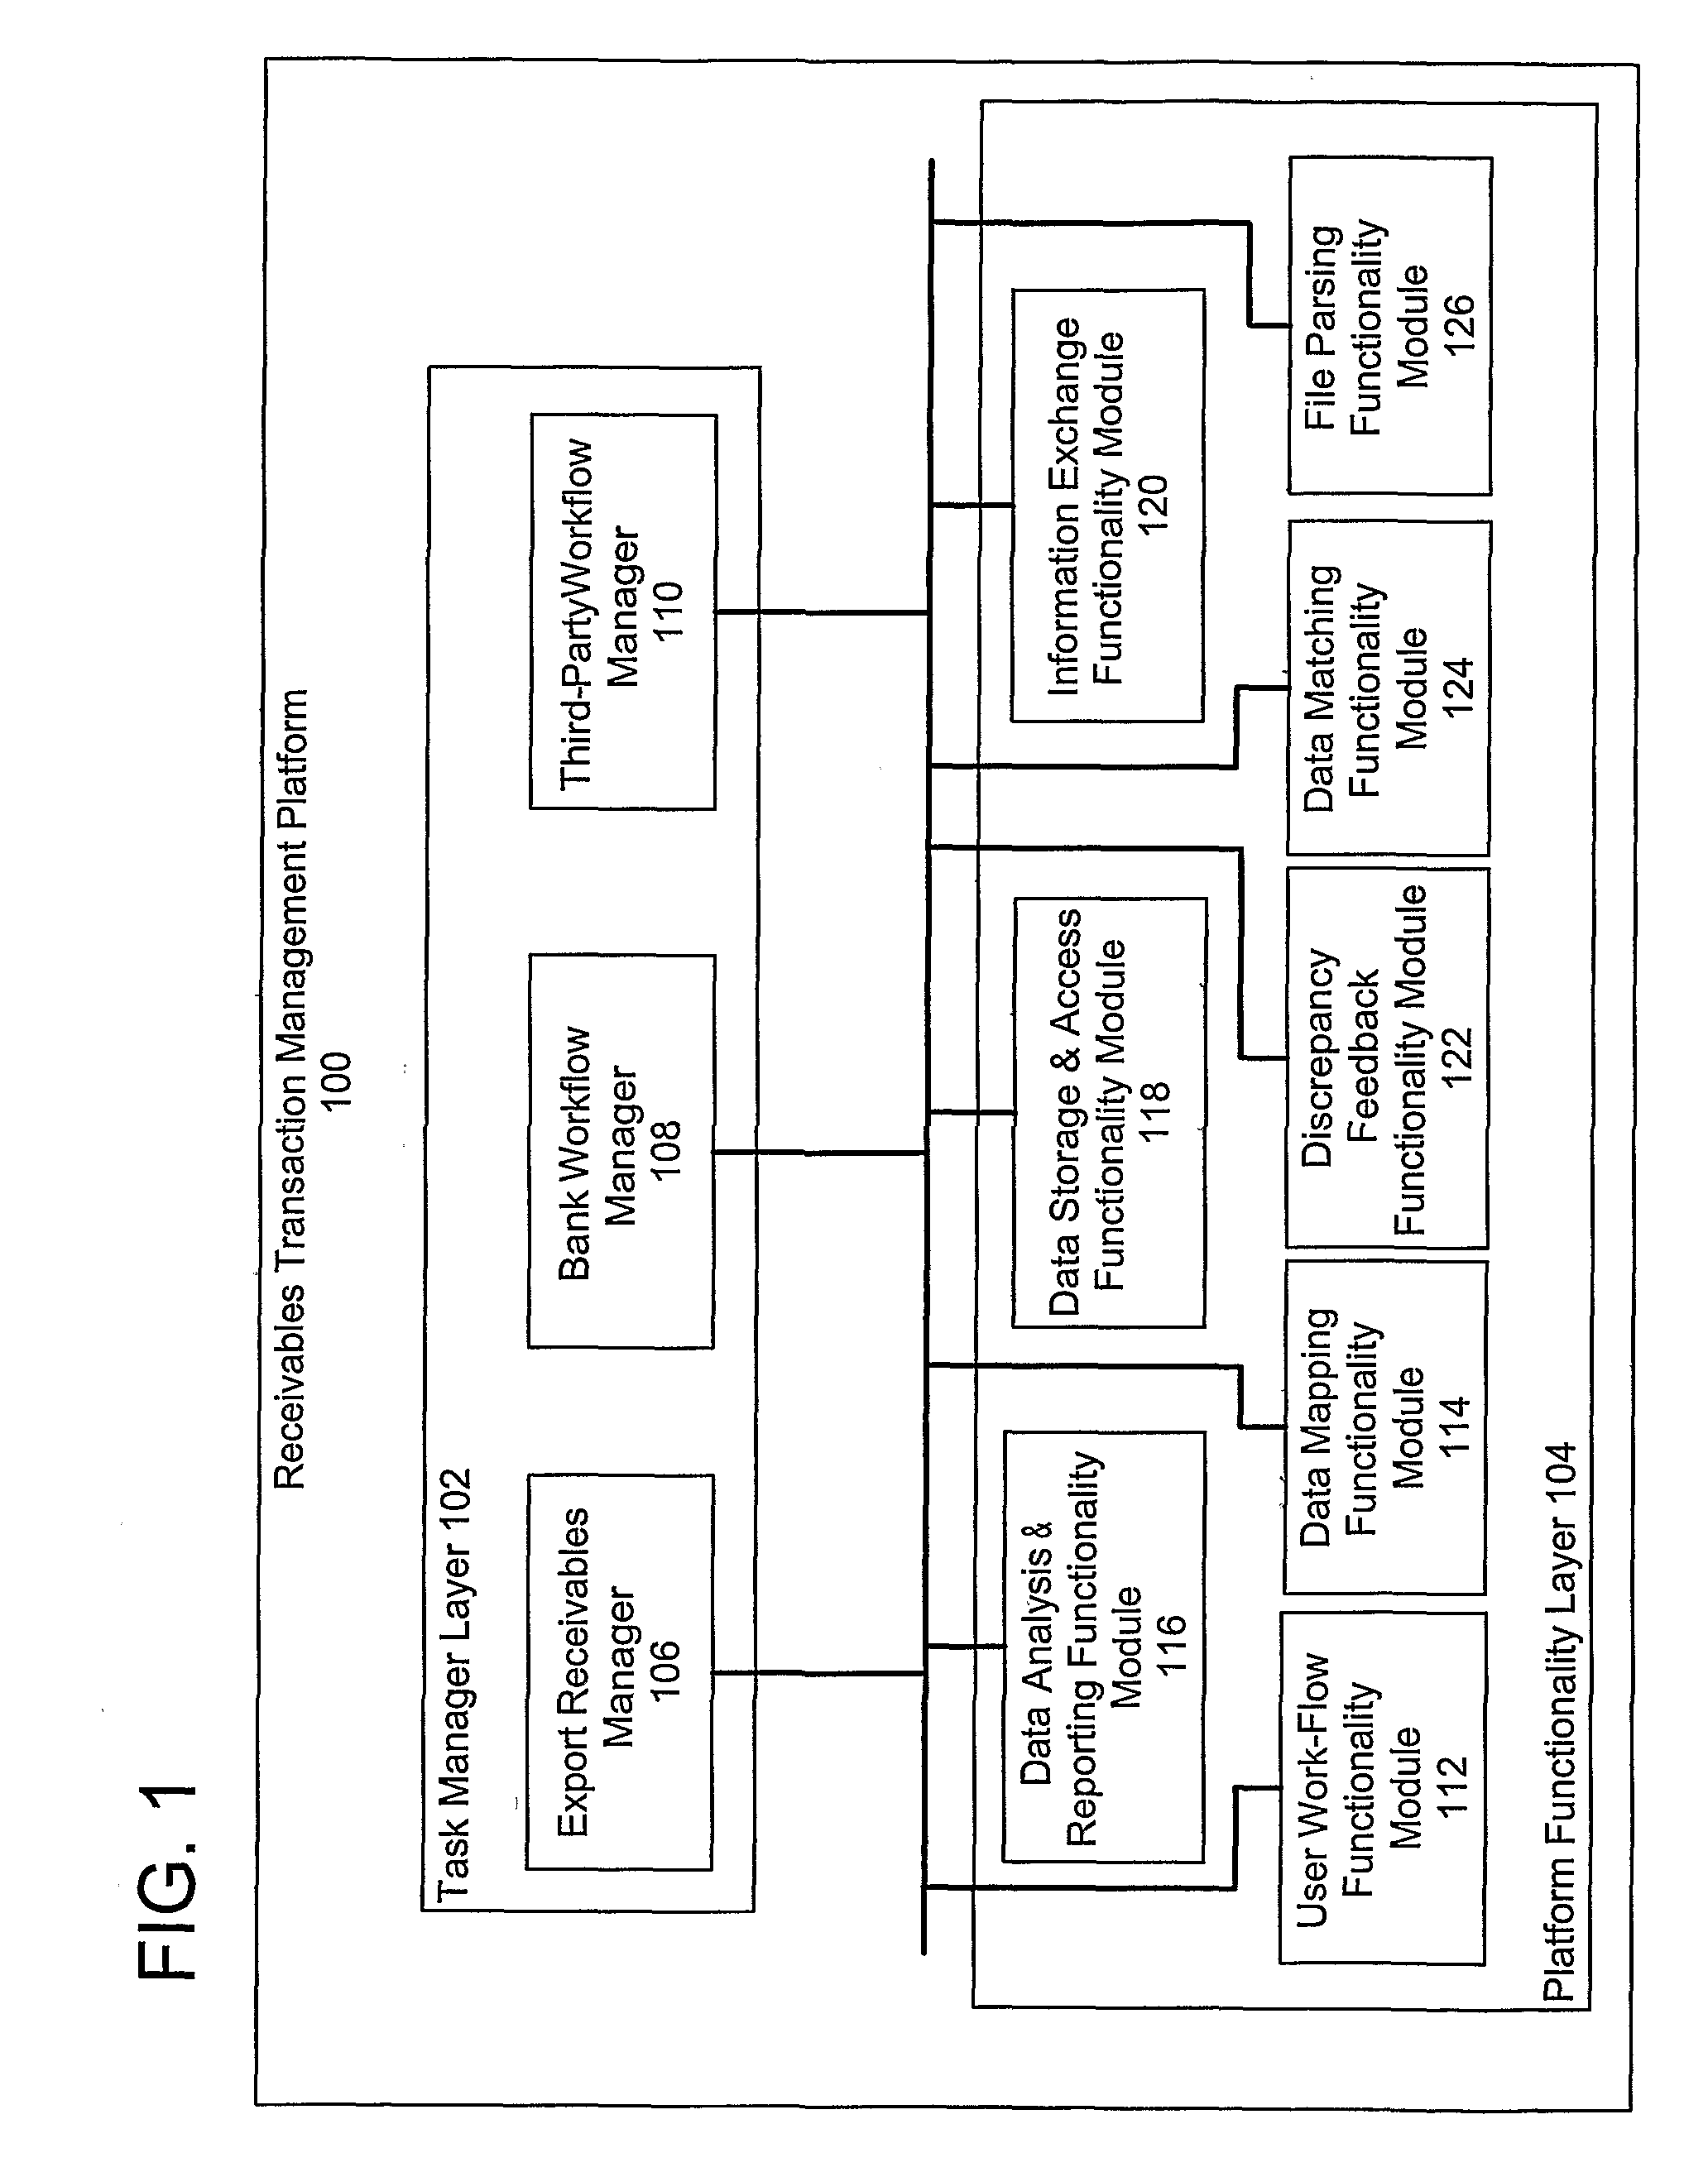 Method and System Configured for Facilitating Management of International Trade Receivables Transactions